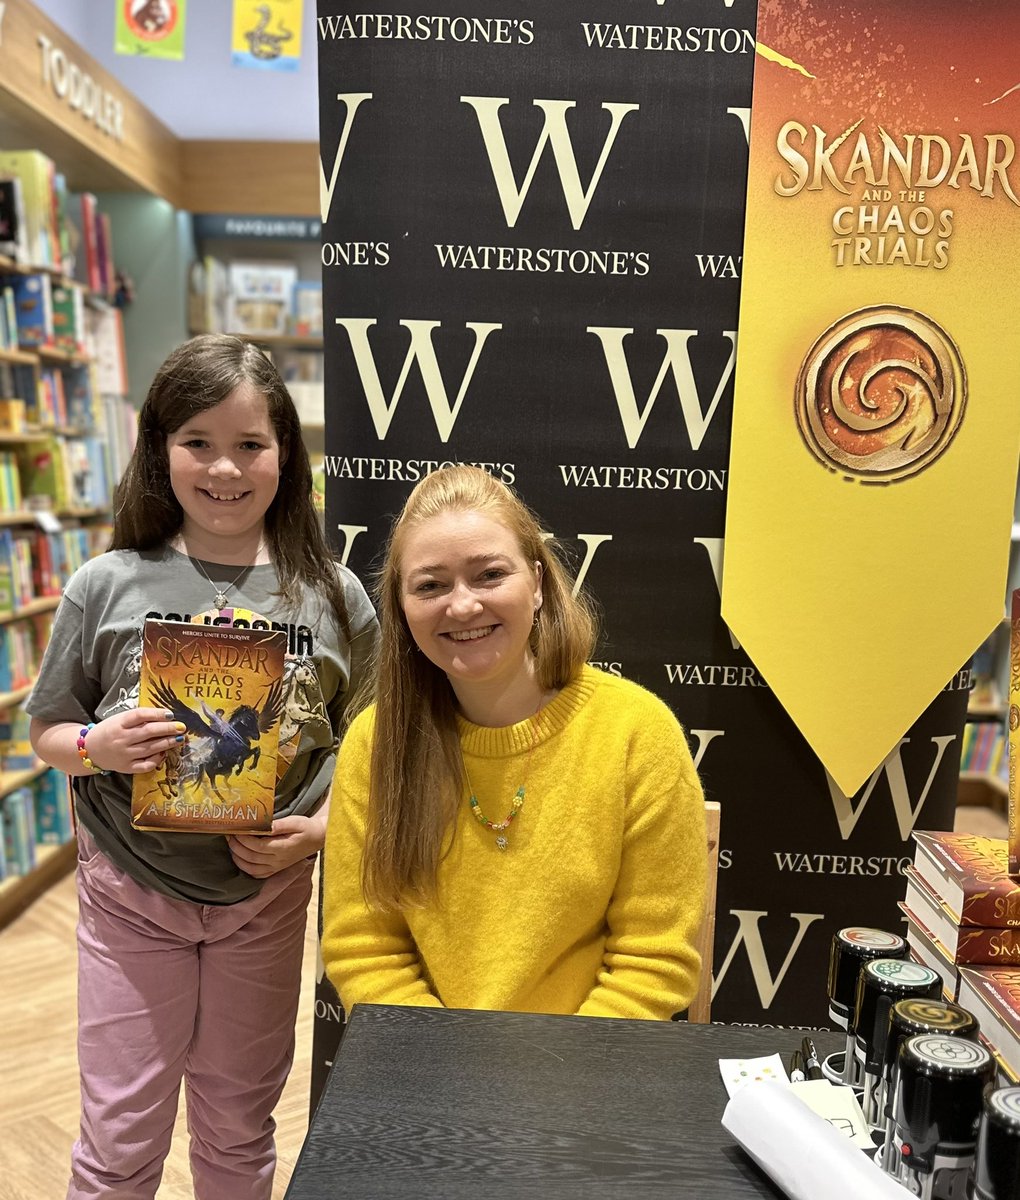 Best day of her life apparently! Meeting her favourite author, thank you @annabelwriter